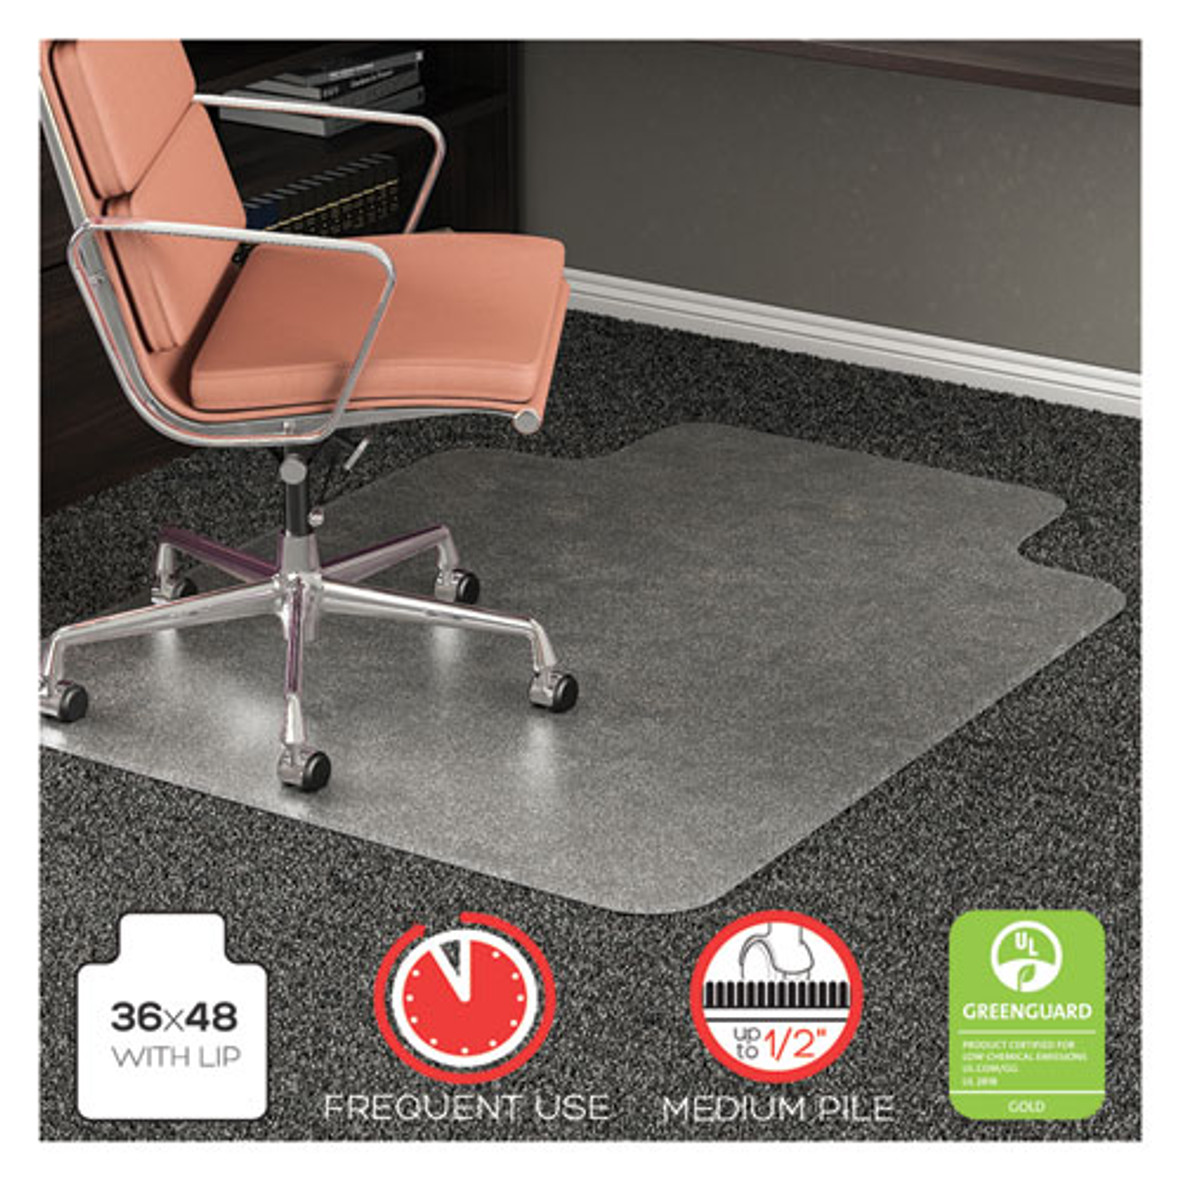 Deflecto® RollaMat Frequent Use Chair Mat, Med Pile Carpet, Flat, 36 x 48, Lipped, Clear, 1 Each/Carton